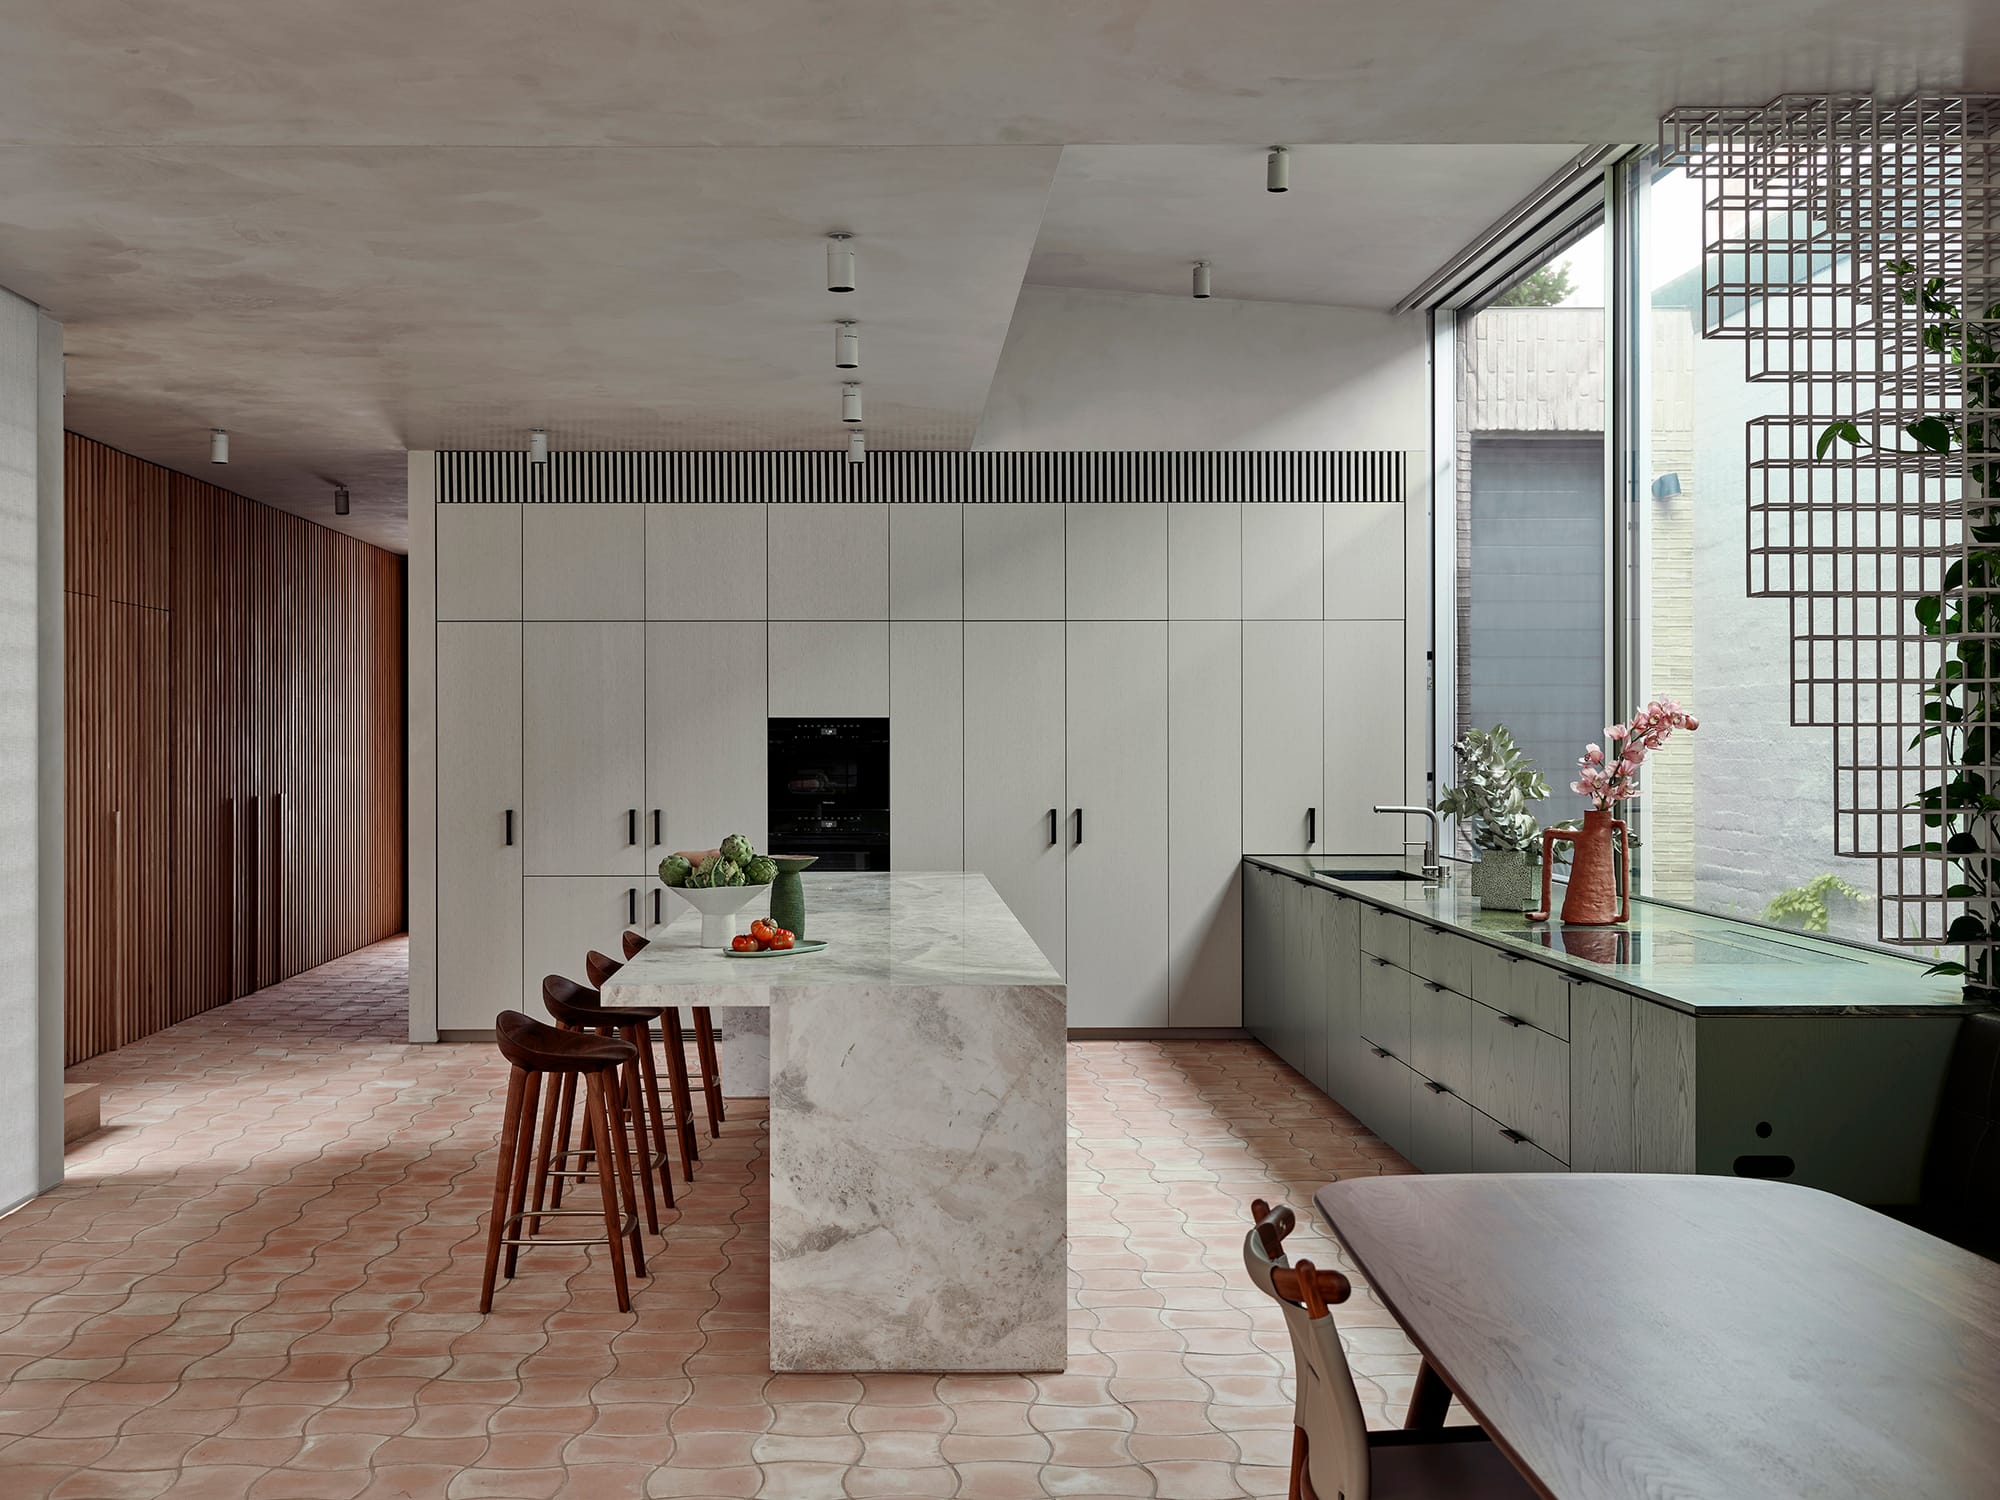 Terra Firma by RobsonRak. Photography by Mark Roper showing the kitchen interior and island bench